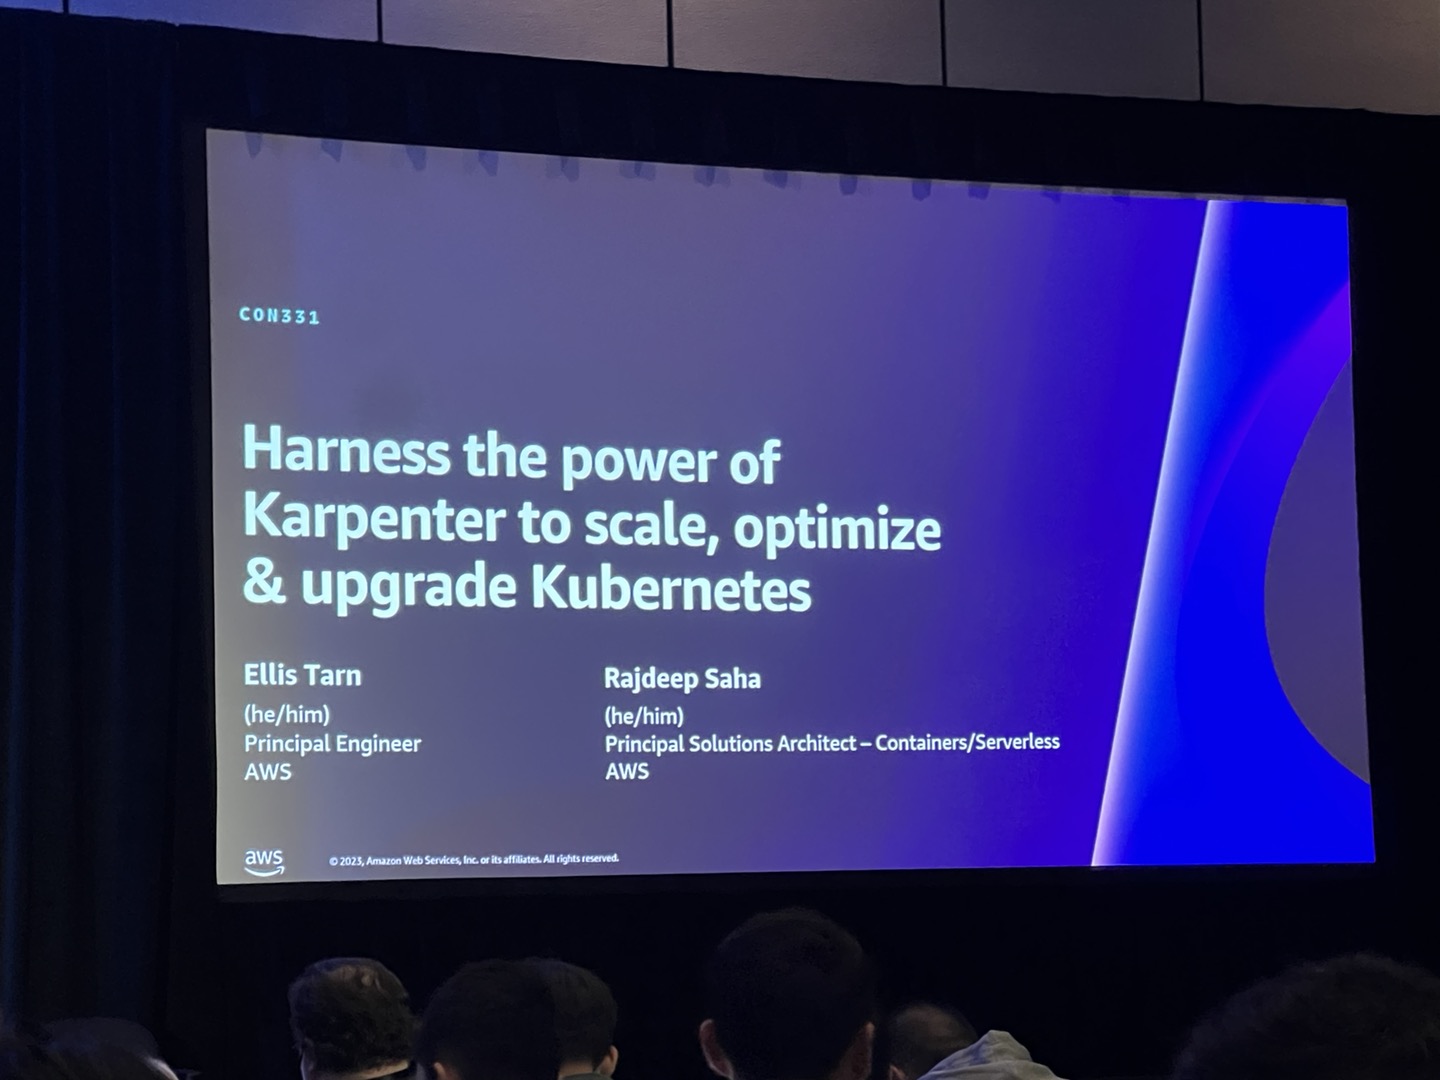 Harness the power of Karpenter to scale, optimize & upgrade Kubernetes